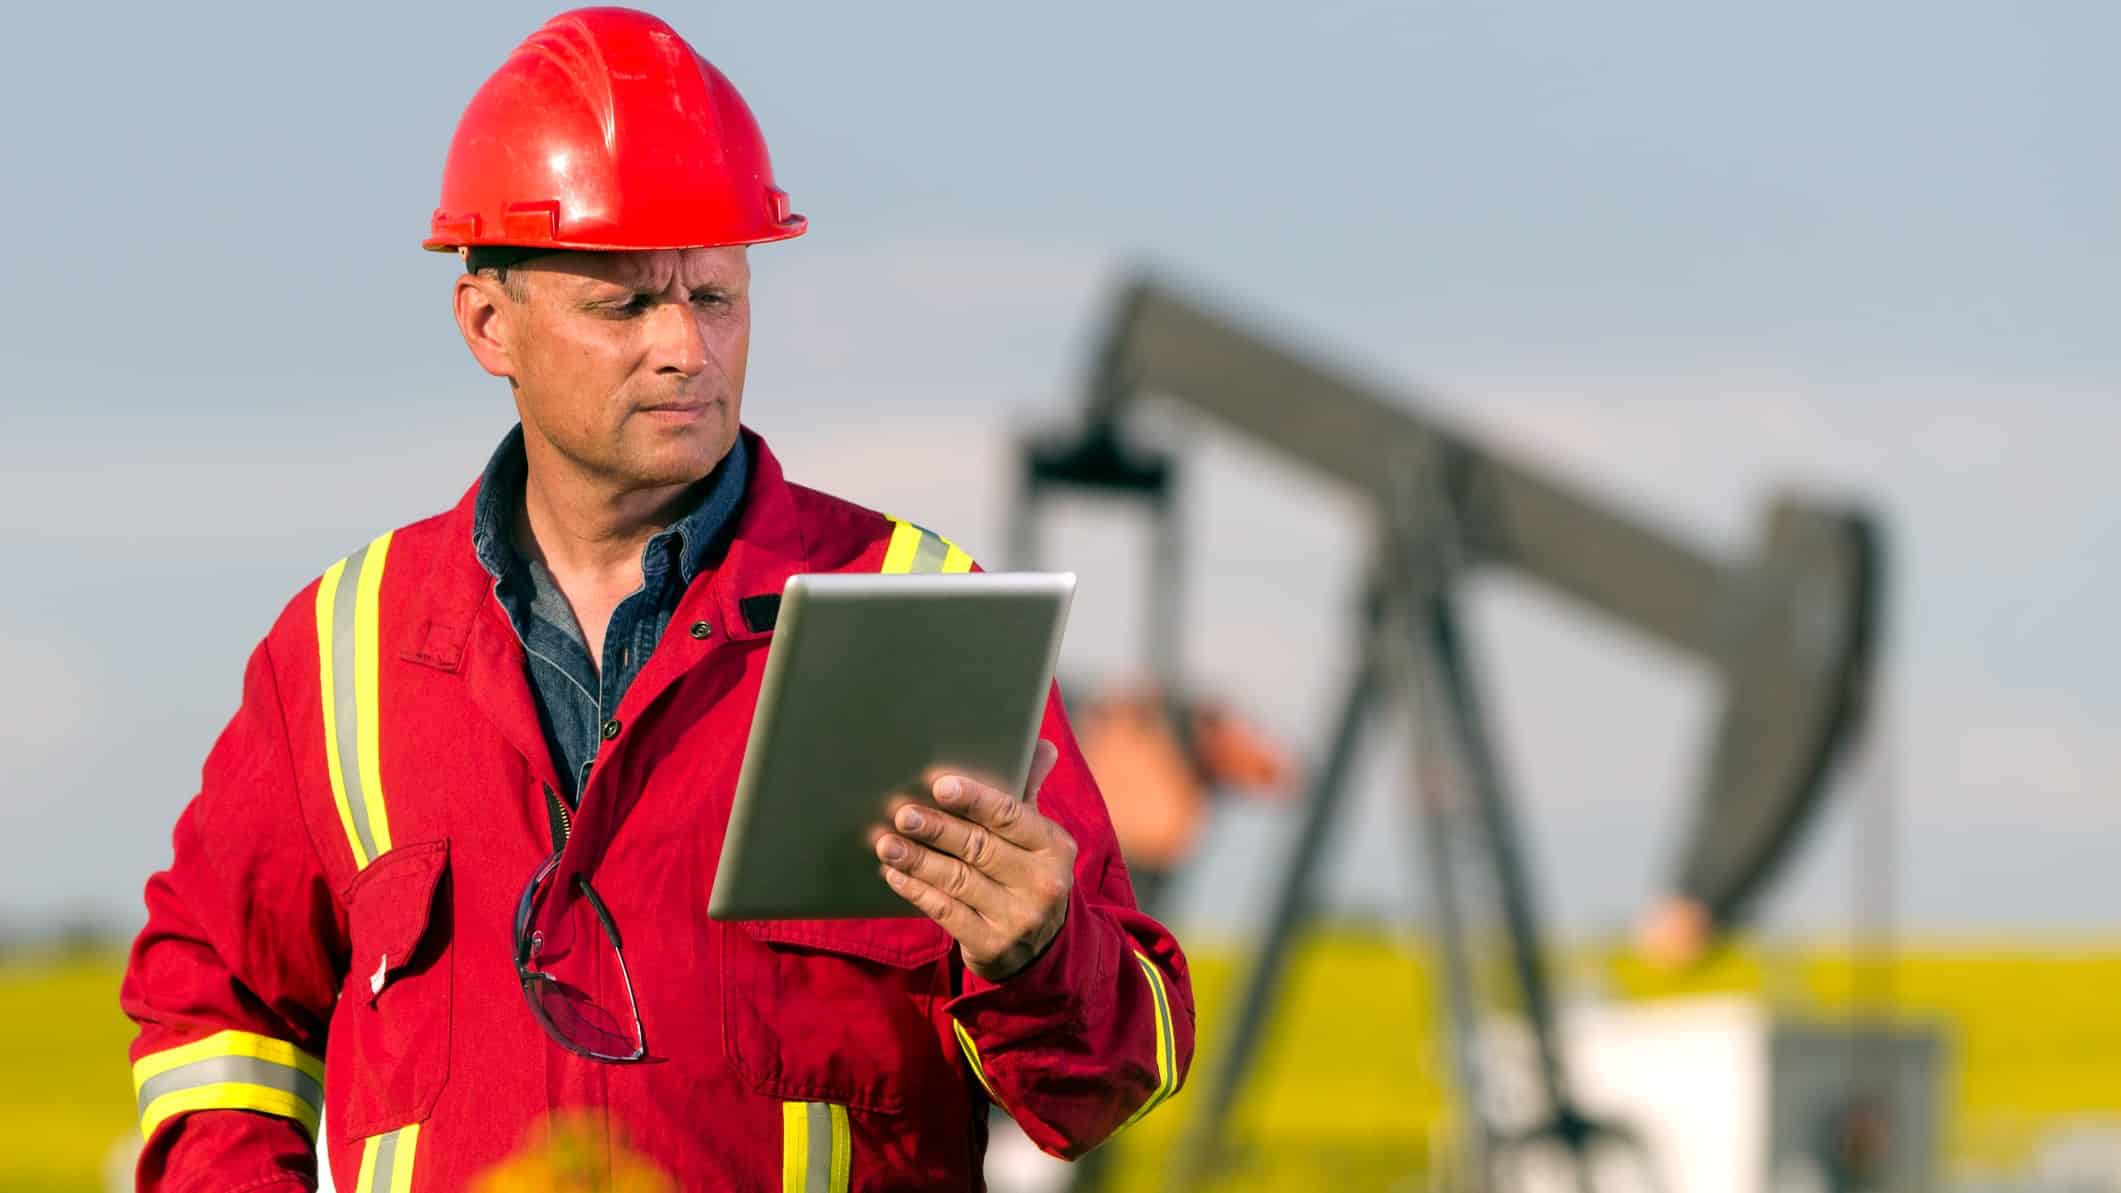 A miner in visibility gear and hard hat looks seriously at an iPad device in a field where oil mining equipment is visible in the background.